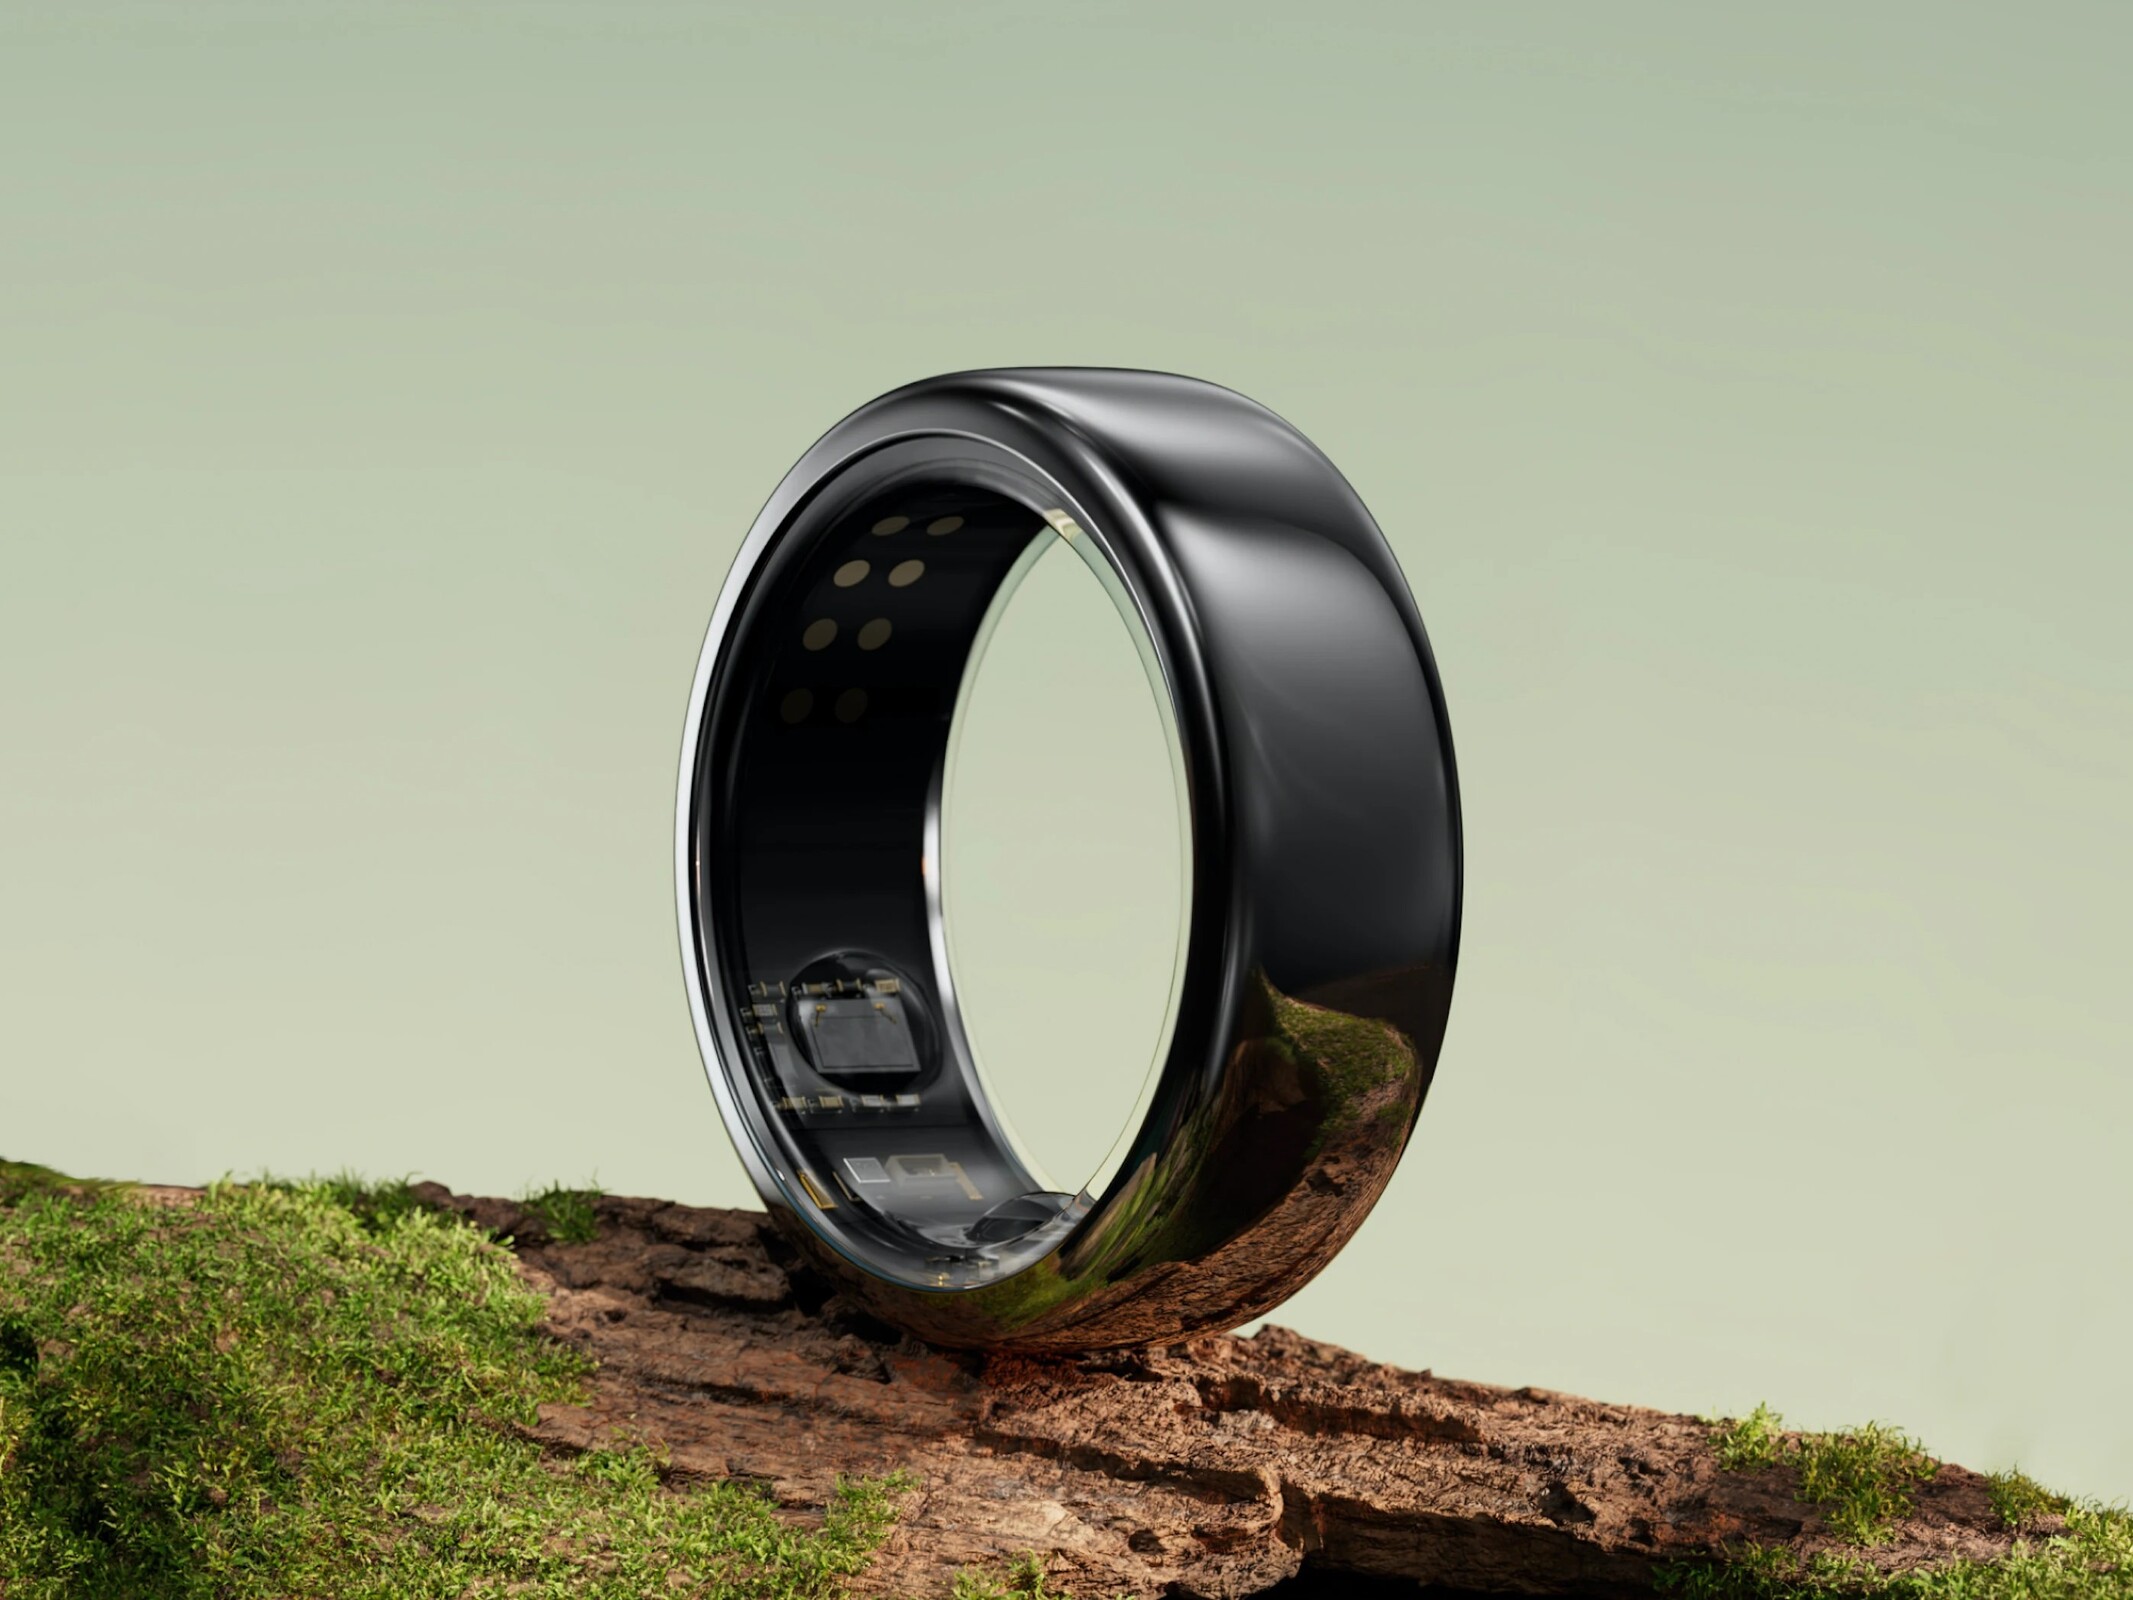 Oura/Best Buy partnership brings the smart ring to 850 stores across the US  | TechCrunch